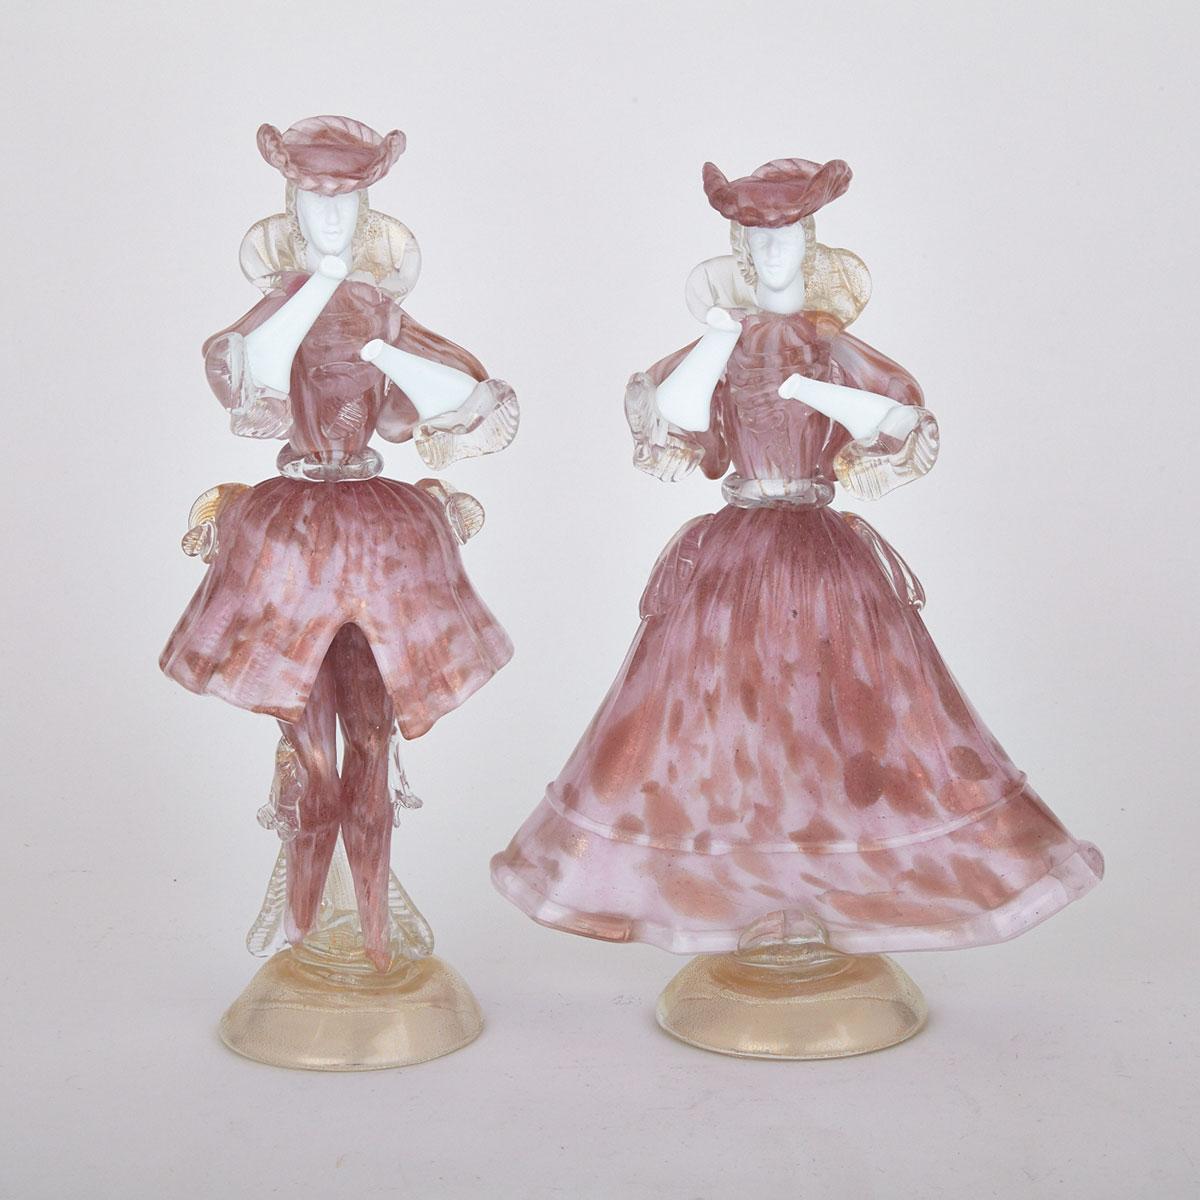 Pair of Murano Glass Figures of Venetian Courtiers, 20th Century